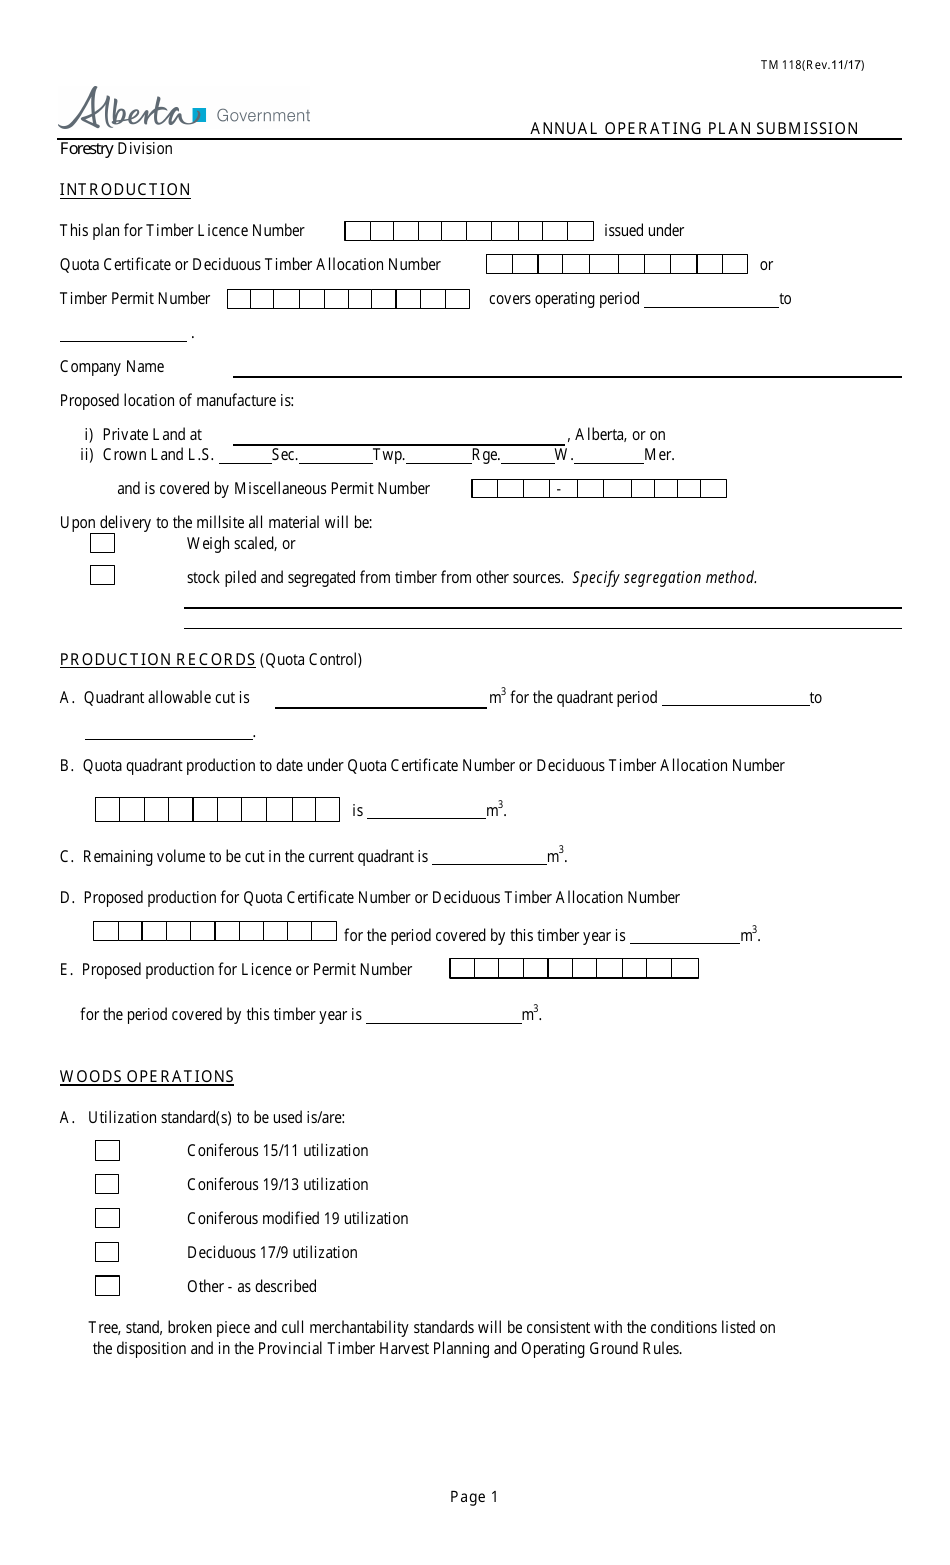 Form TM118 Annual Operating Plan Submission - Alberta, Canada, Page 1